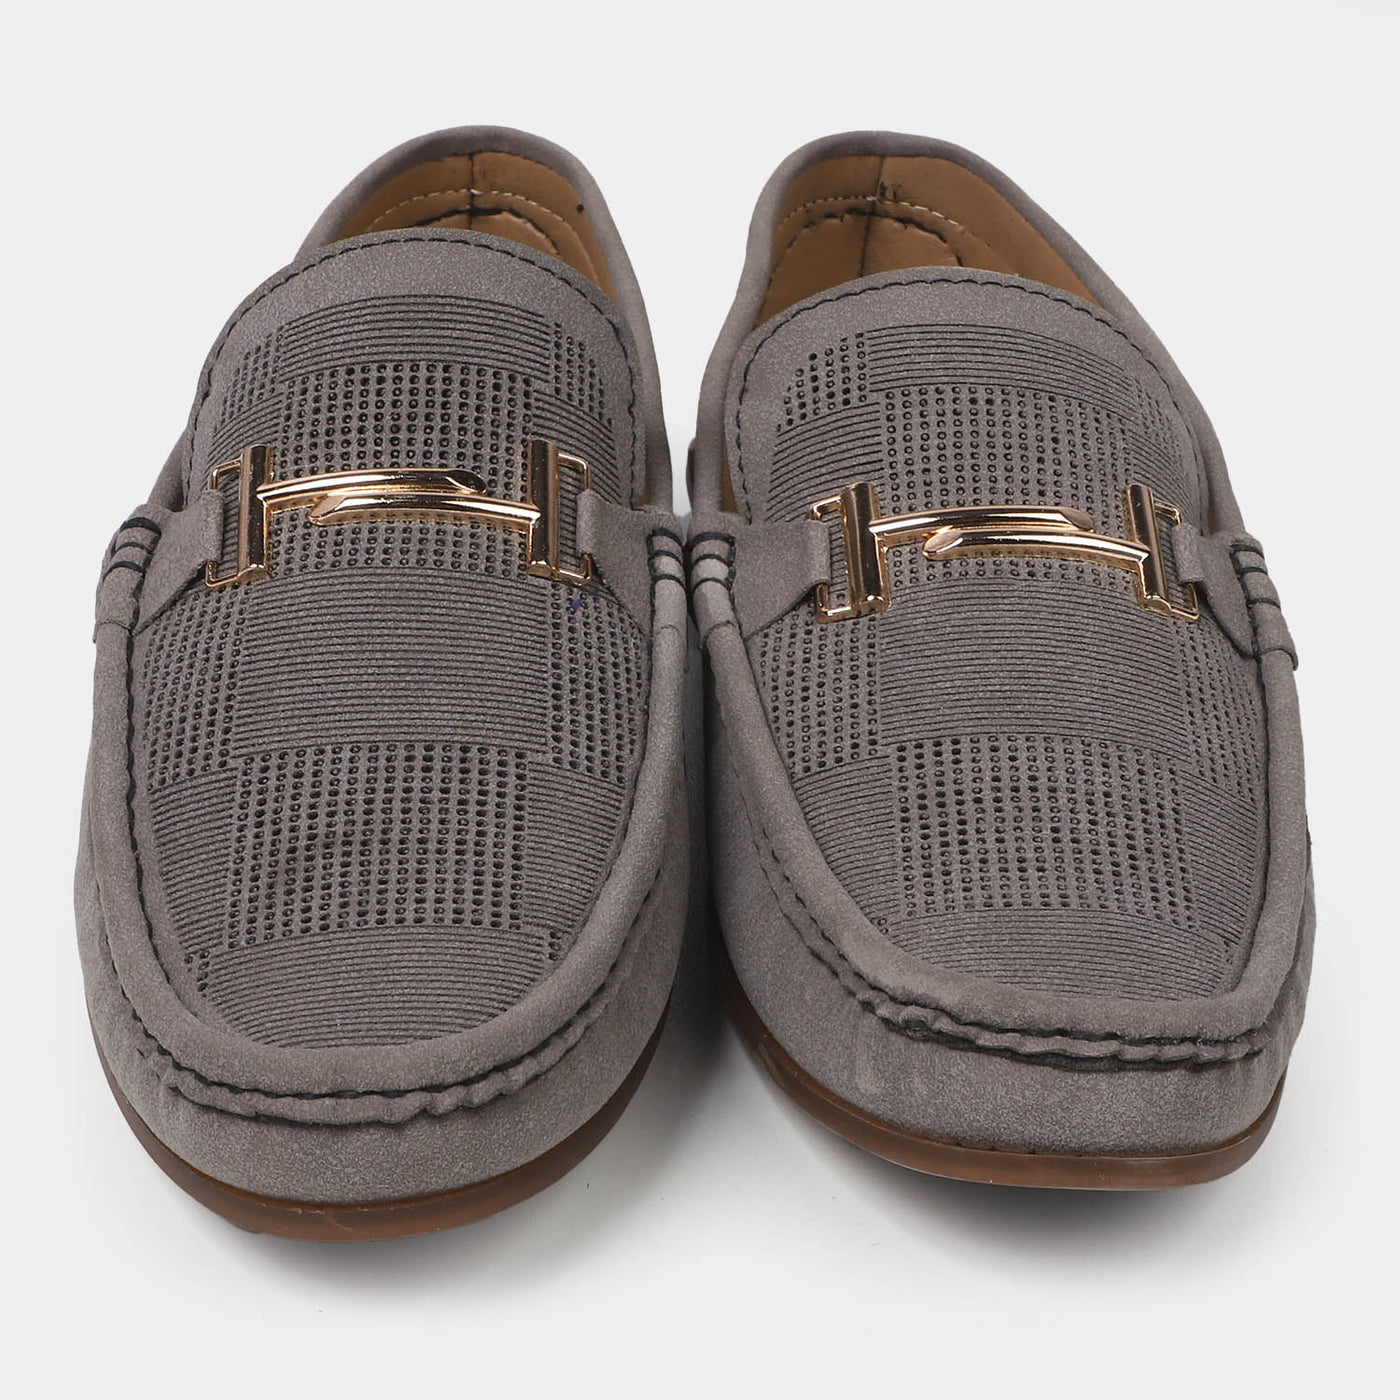 Teens Boys Loafer Shoes LF-5 - GREY